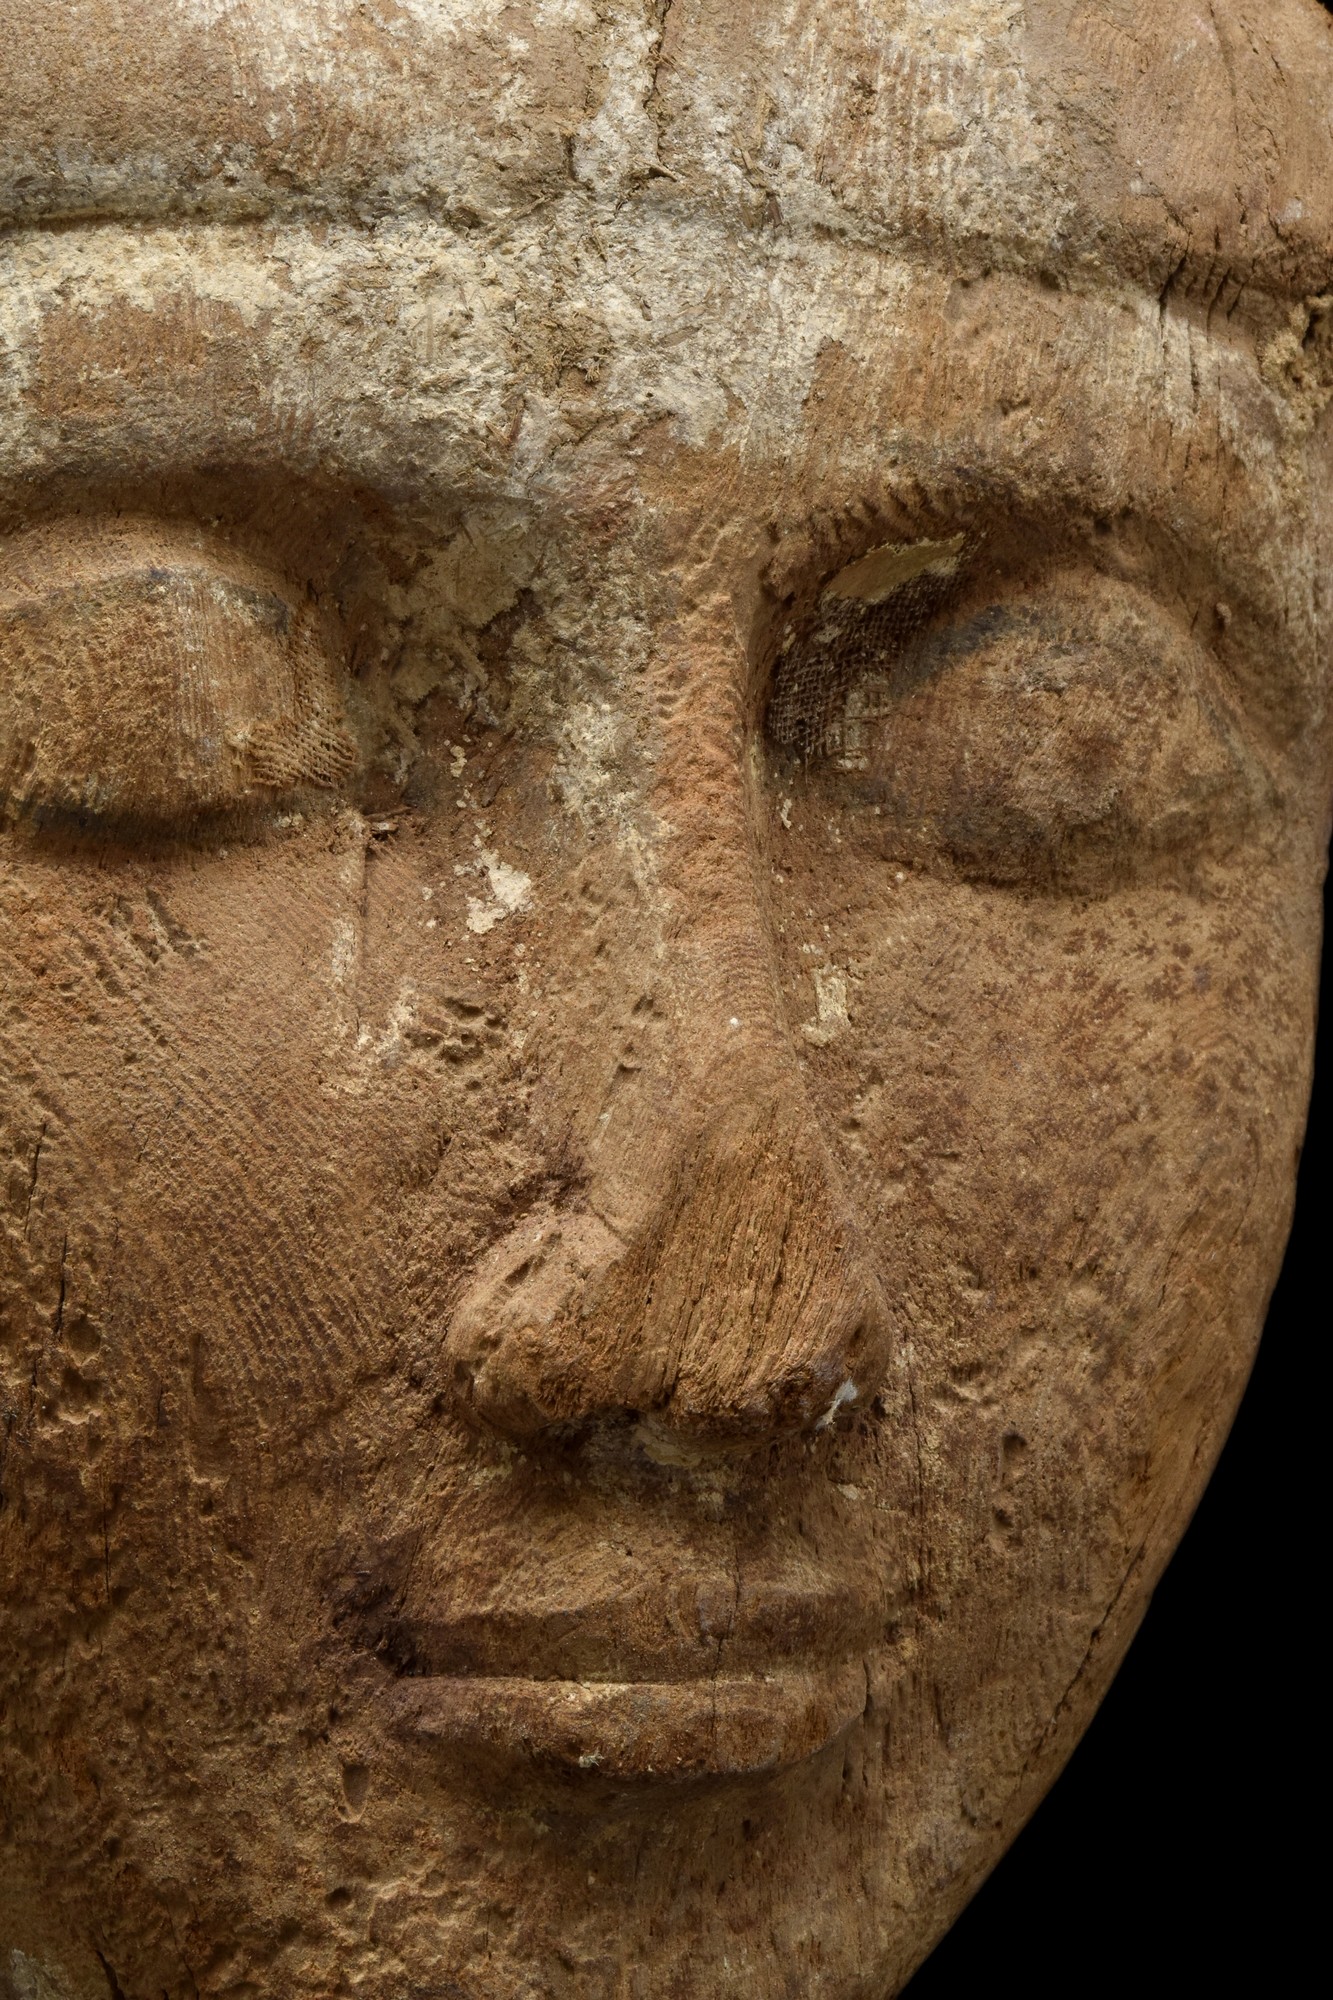 AN ANCIENT EGYPTIAN WOOD SARCOPHAGUS MUMMY MASK - Image 4 of 5